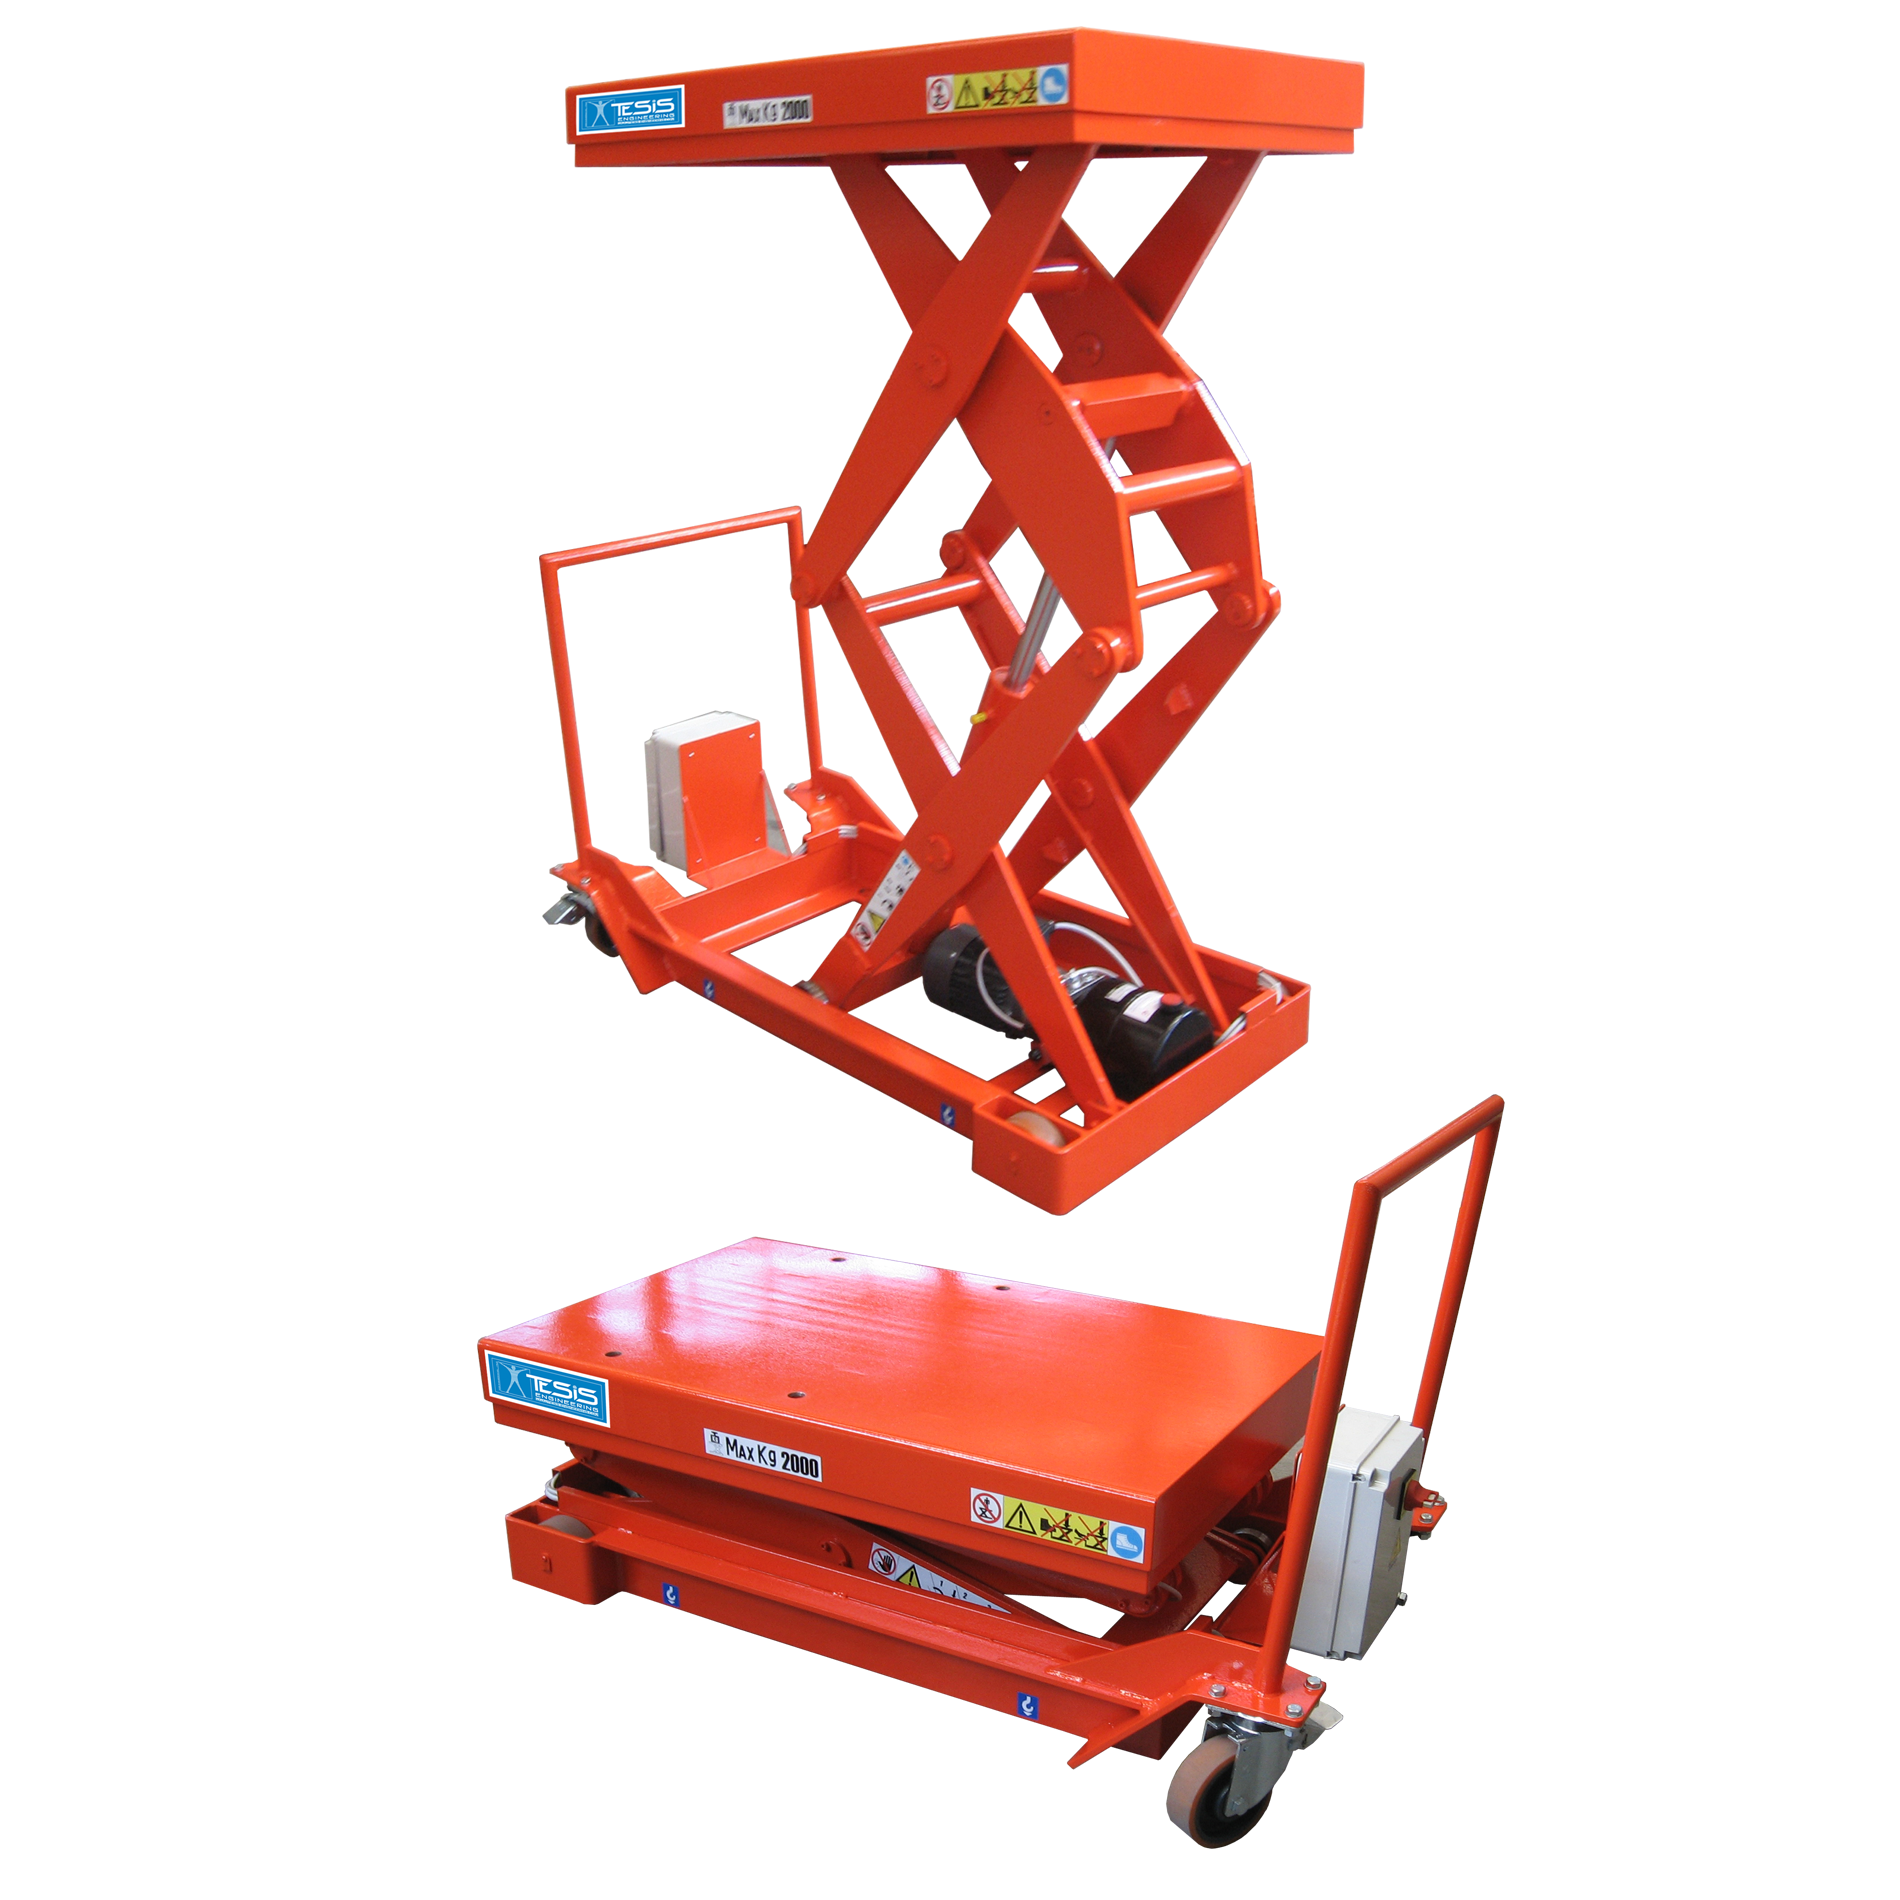 Portable electro-hydraulic lift table - scissot lift cart - wheeled lifting tables - mobile platform lifts - mobile lift tables